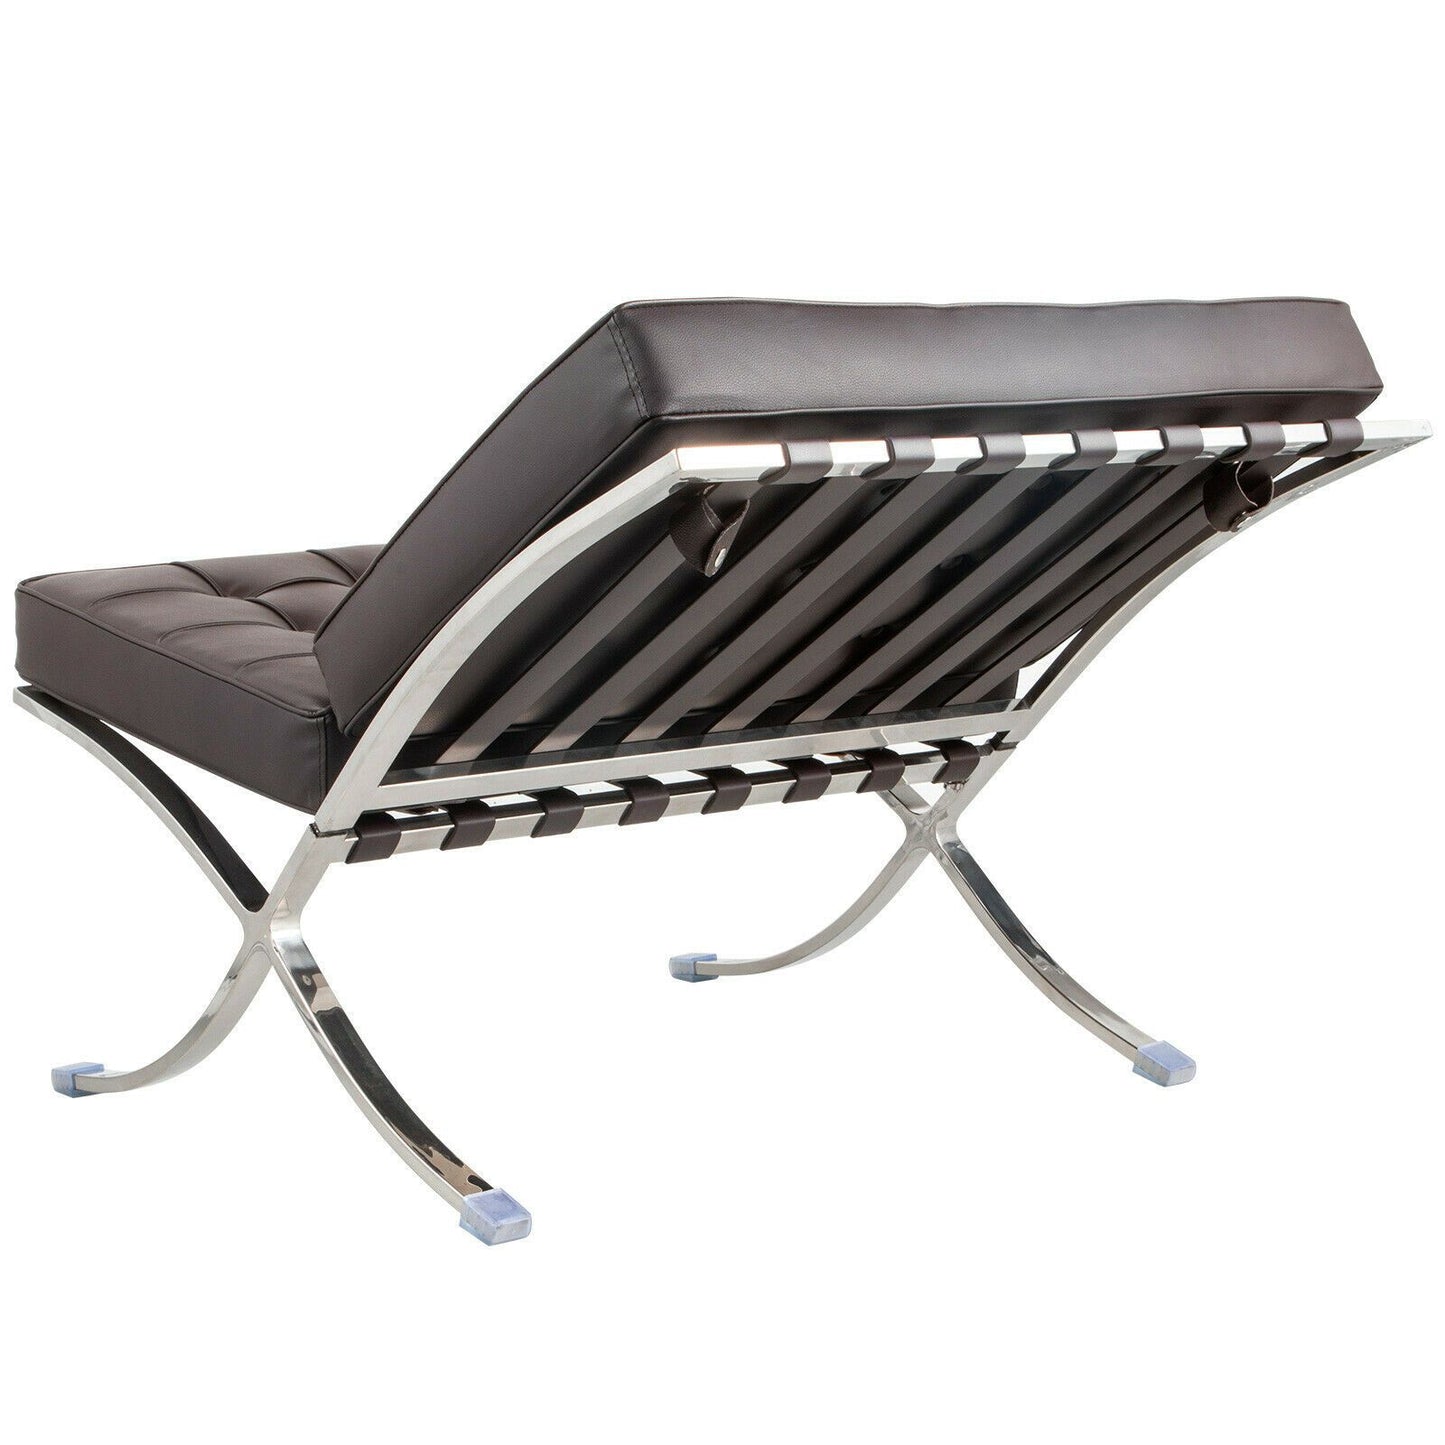 Luxurious Brown Leather Chaise Lounge Chair - Westfield Retailers